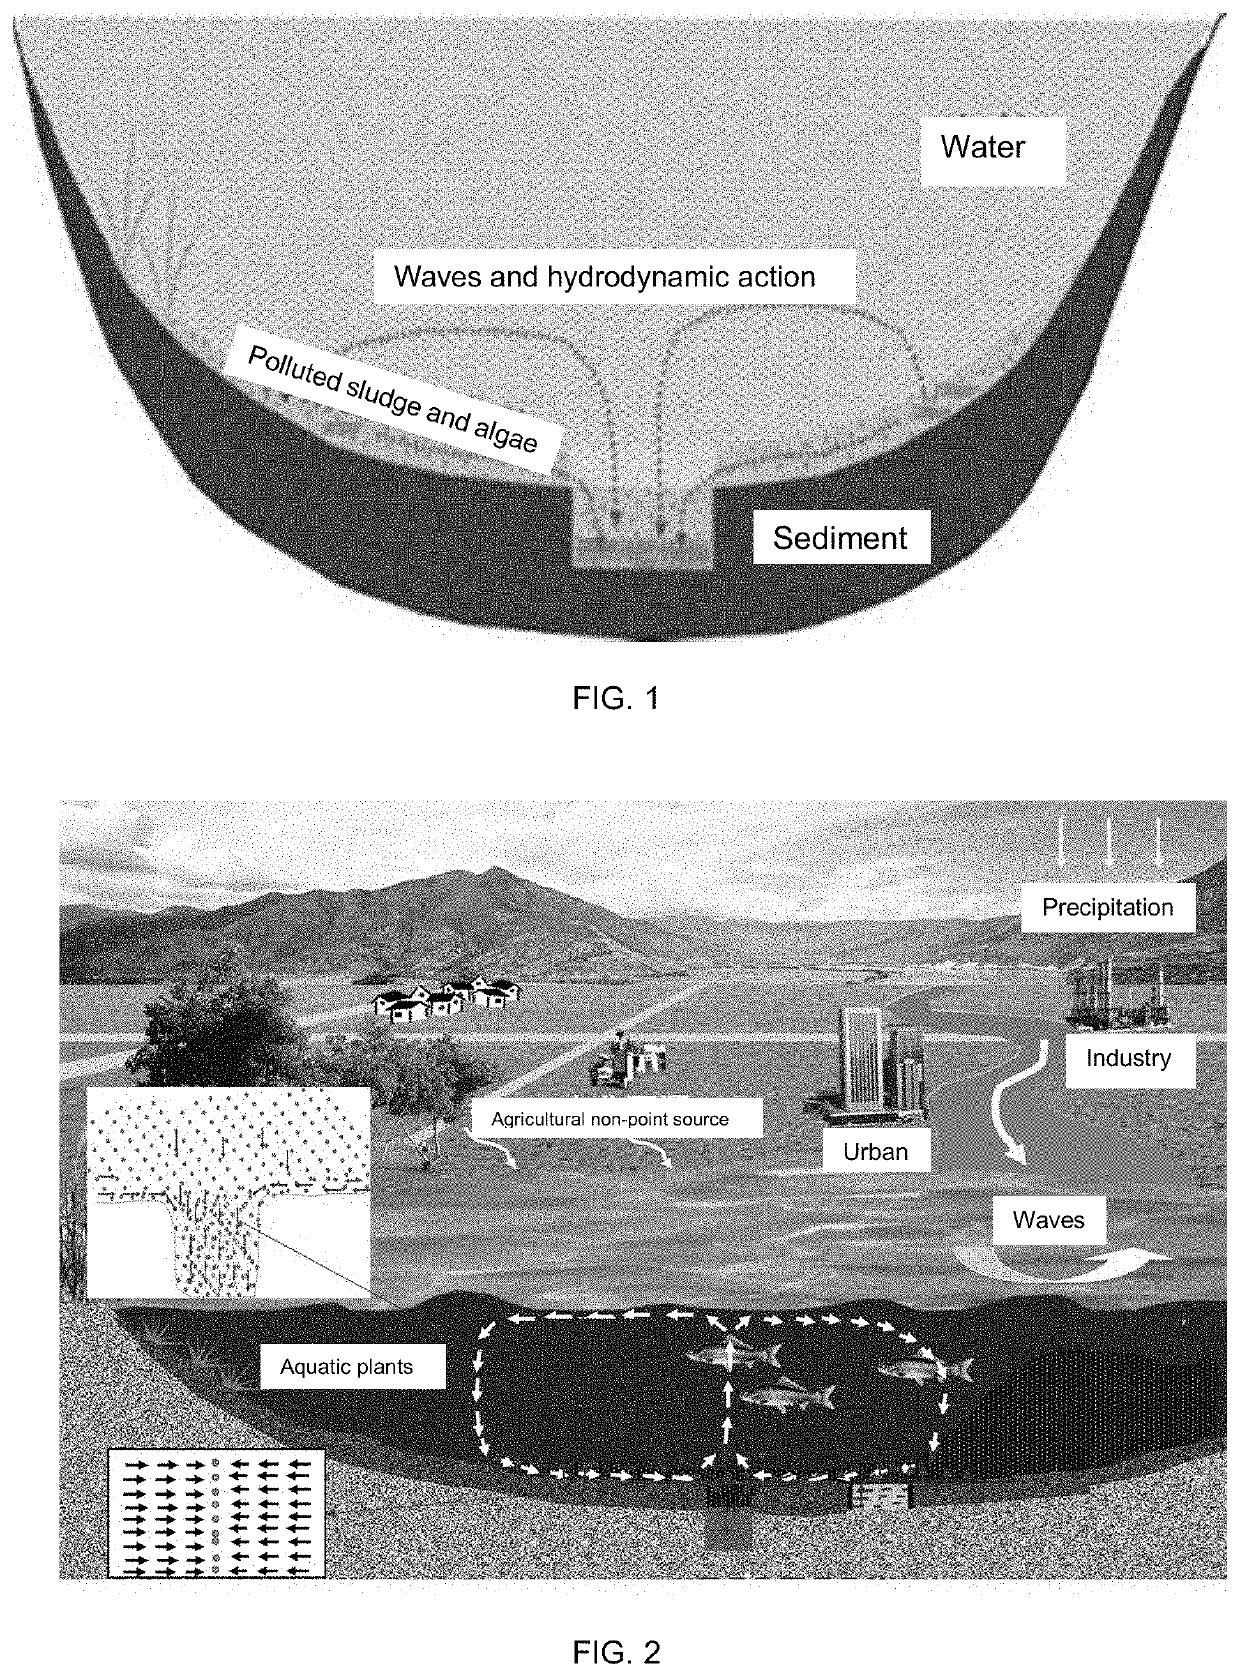 Integrated method for clearance, collection and capture of internal pollutants and algae in a surface layer of the lake bottom